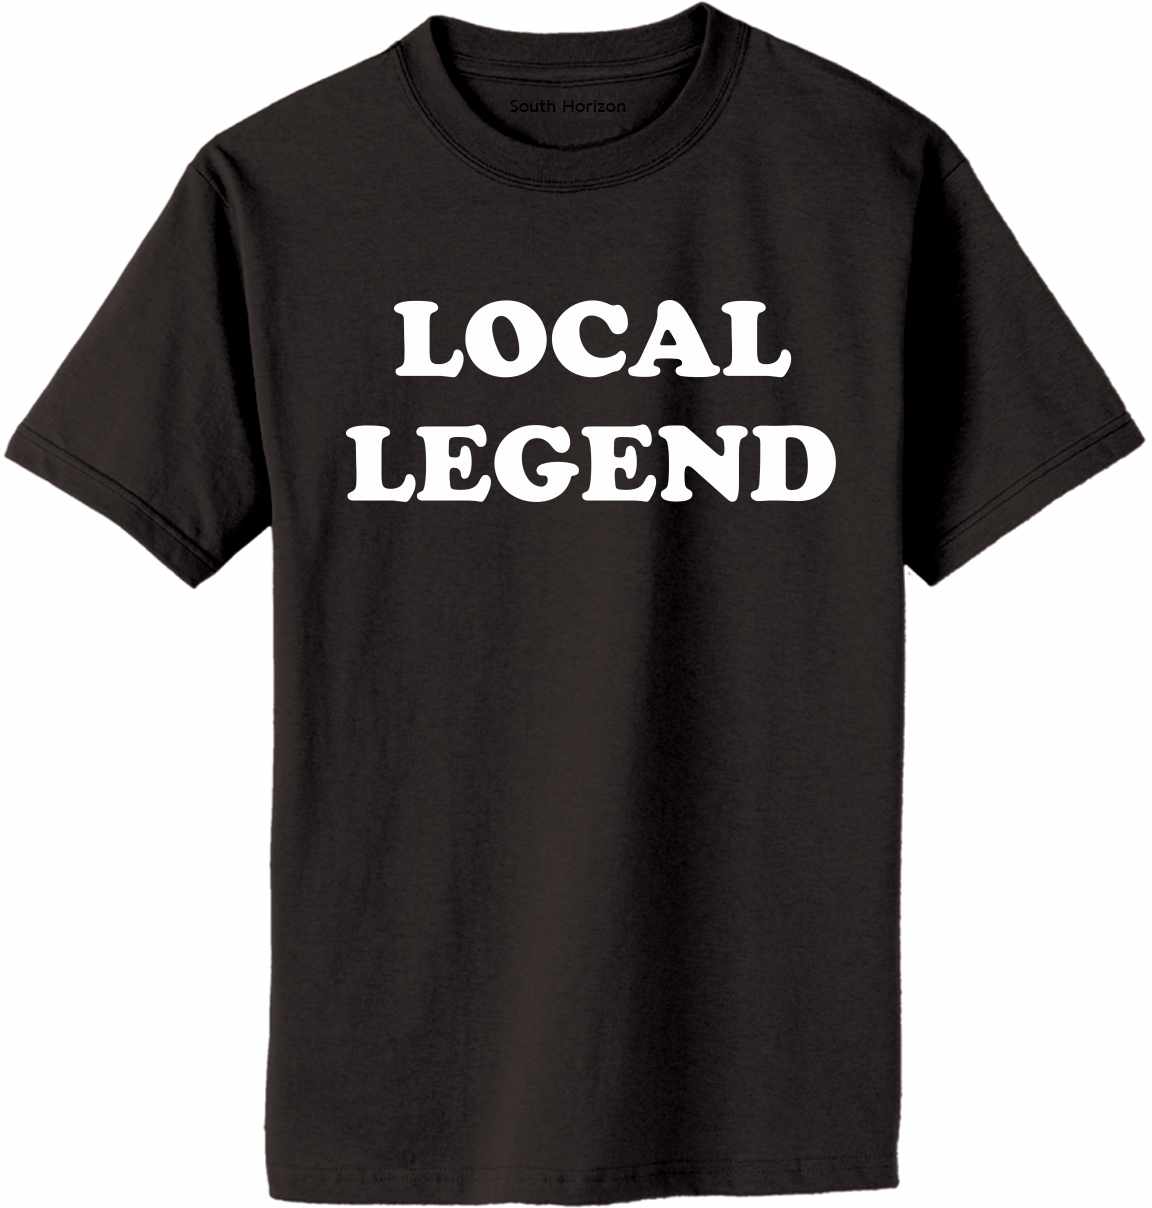 Local Legend on Adult T-Shirt